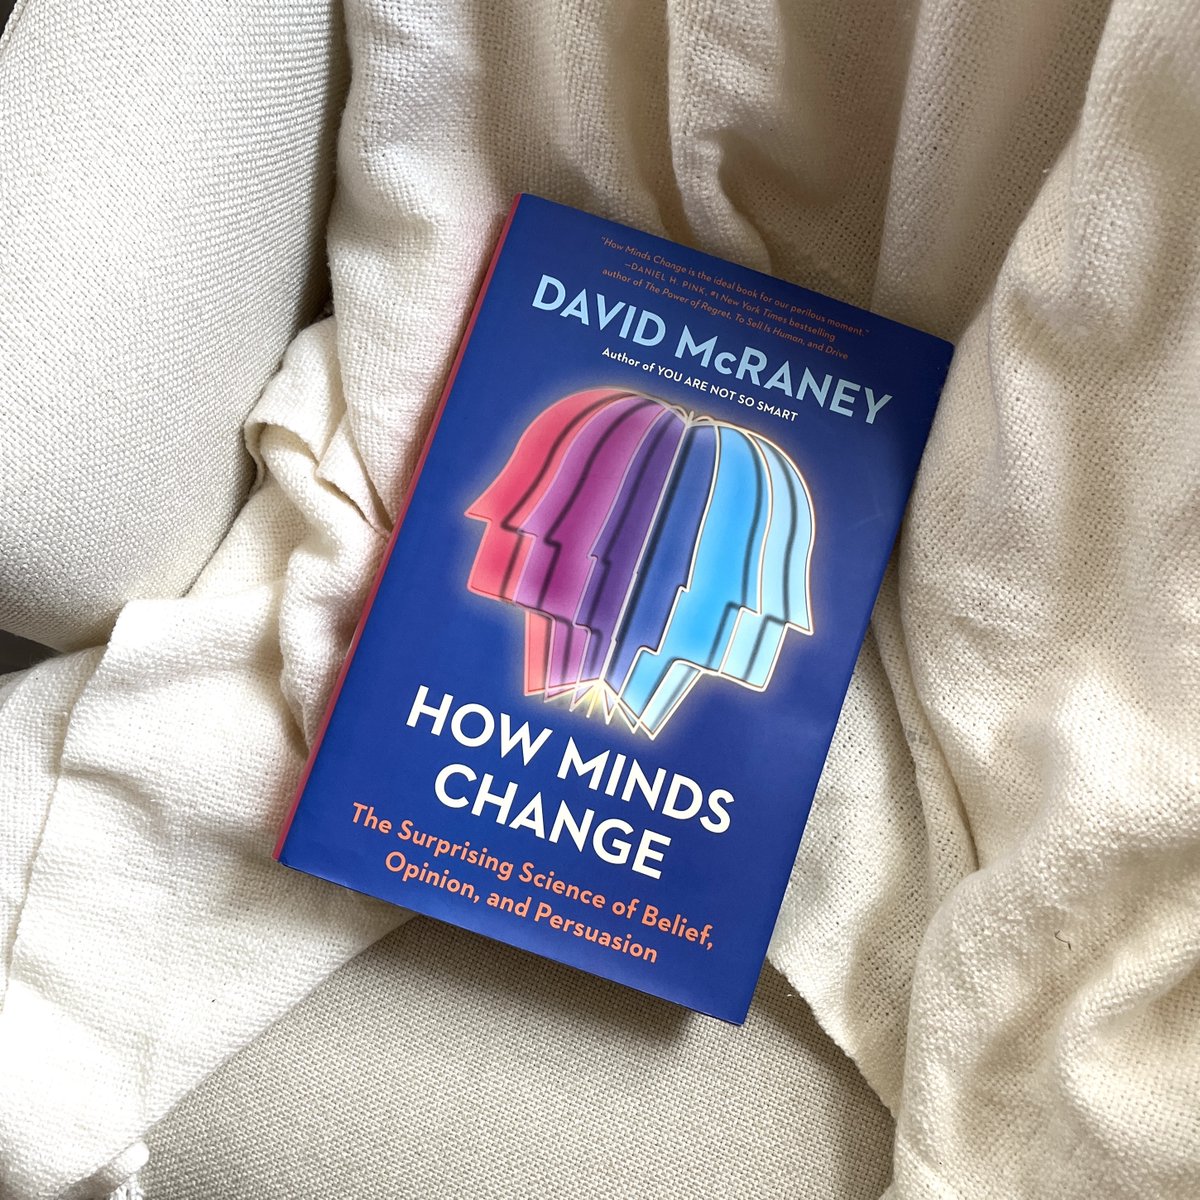 Dive into HOW MINDS CHANGE, and discover new persuasion techniques for having better conversations! 🌟 From the bestselling author @davidmcraney comes a brain-bending investigation into the limits of reasoning, the power of groupthink, and the effects of deep canvassing. 🧠